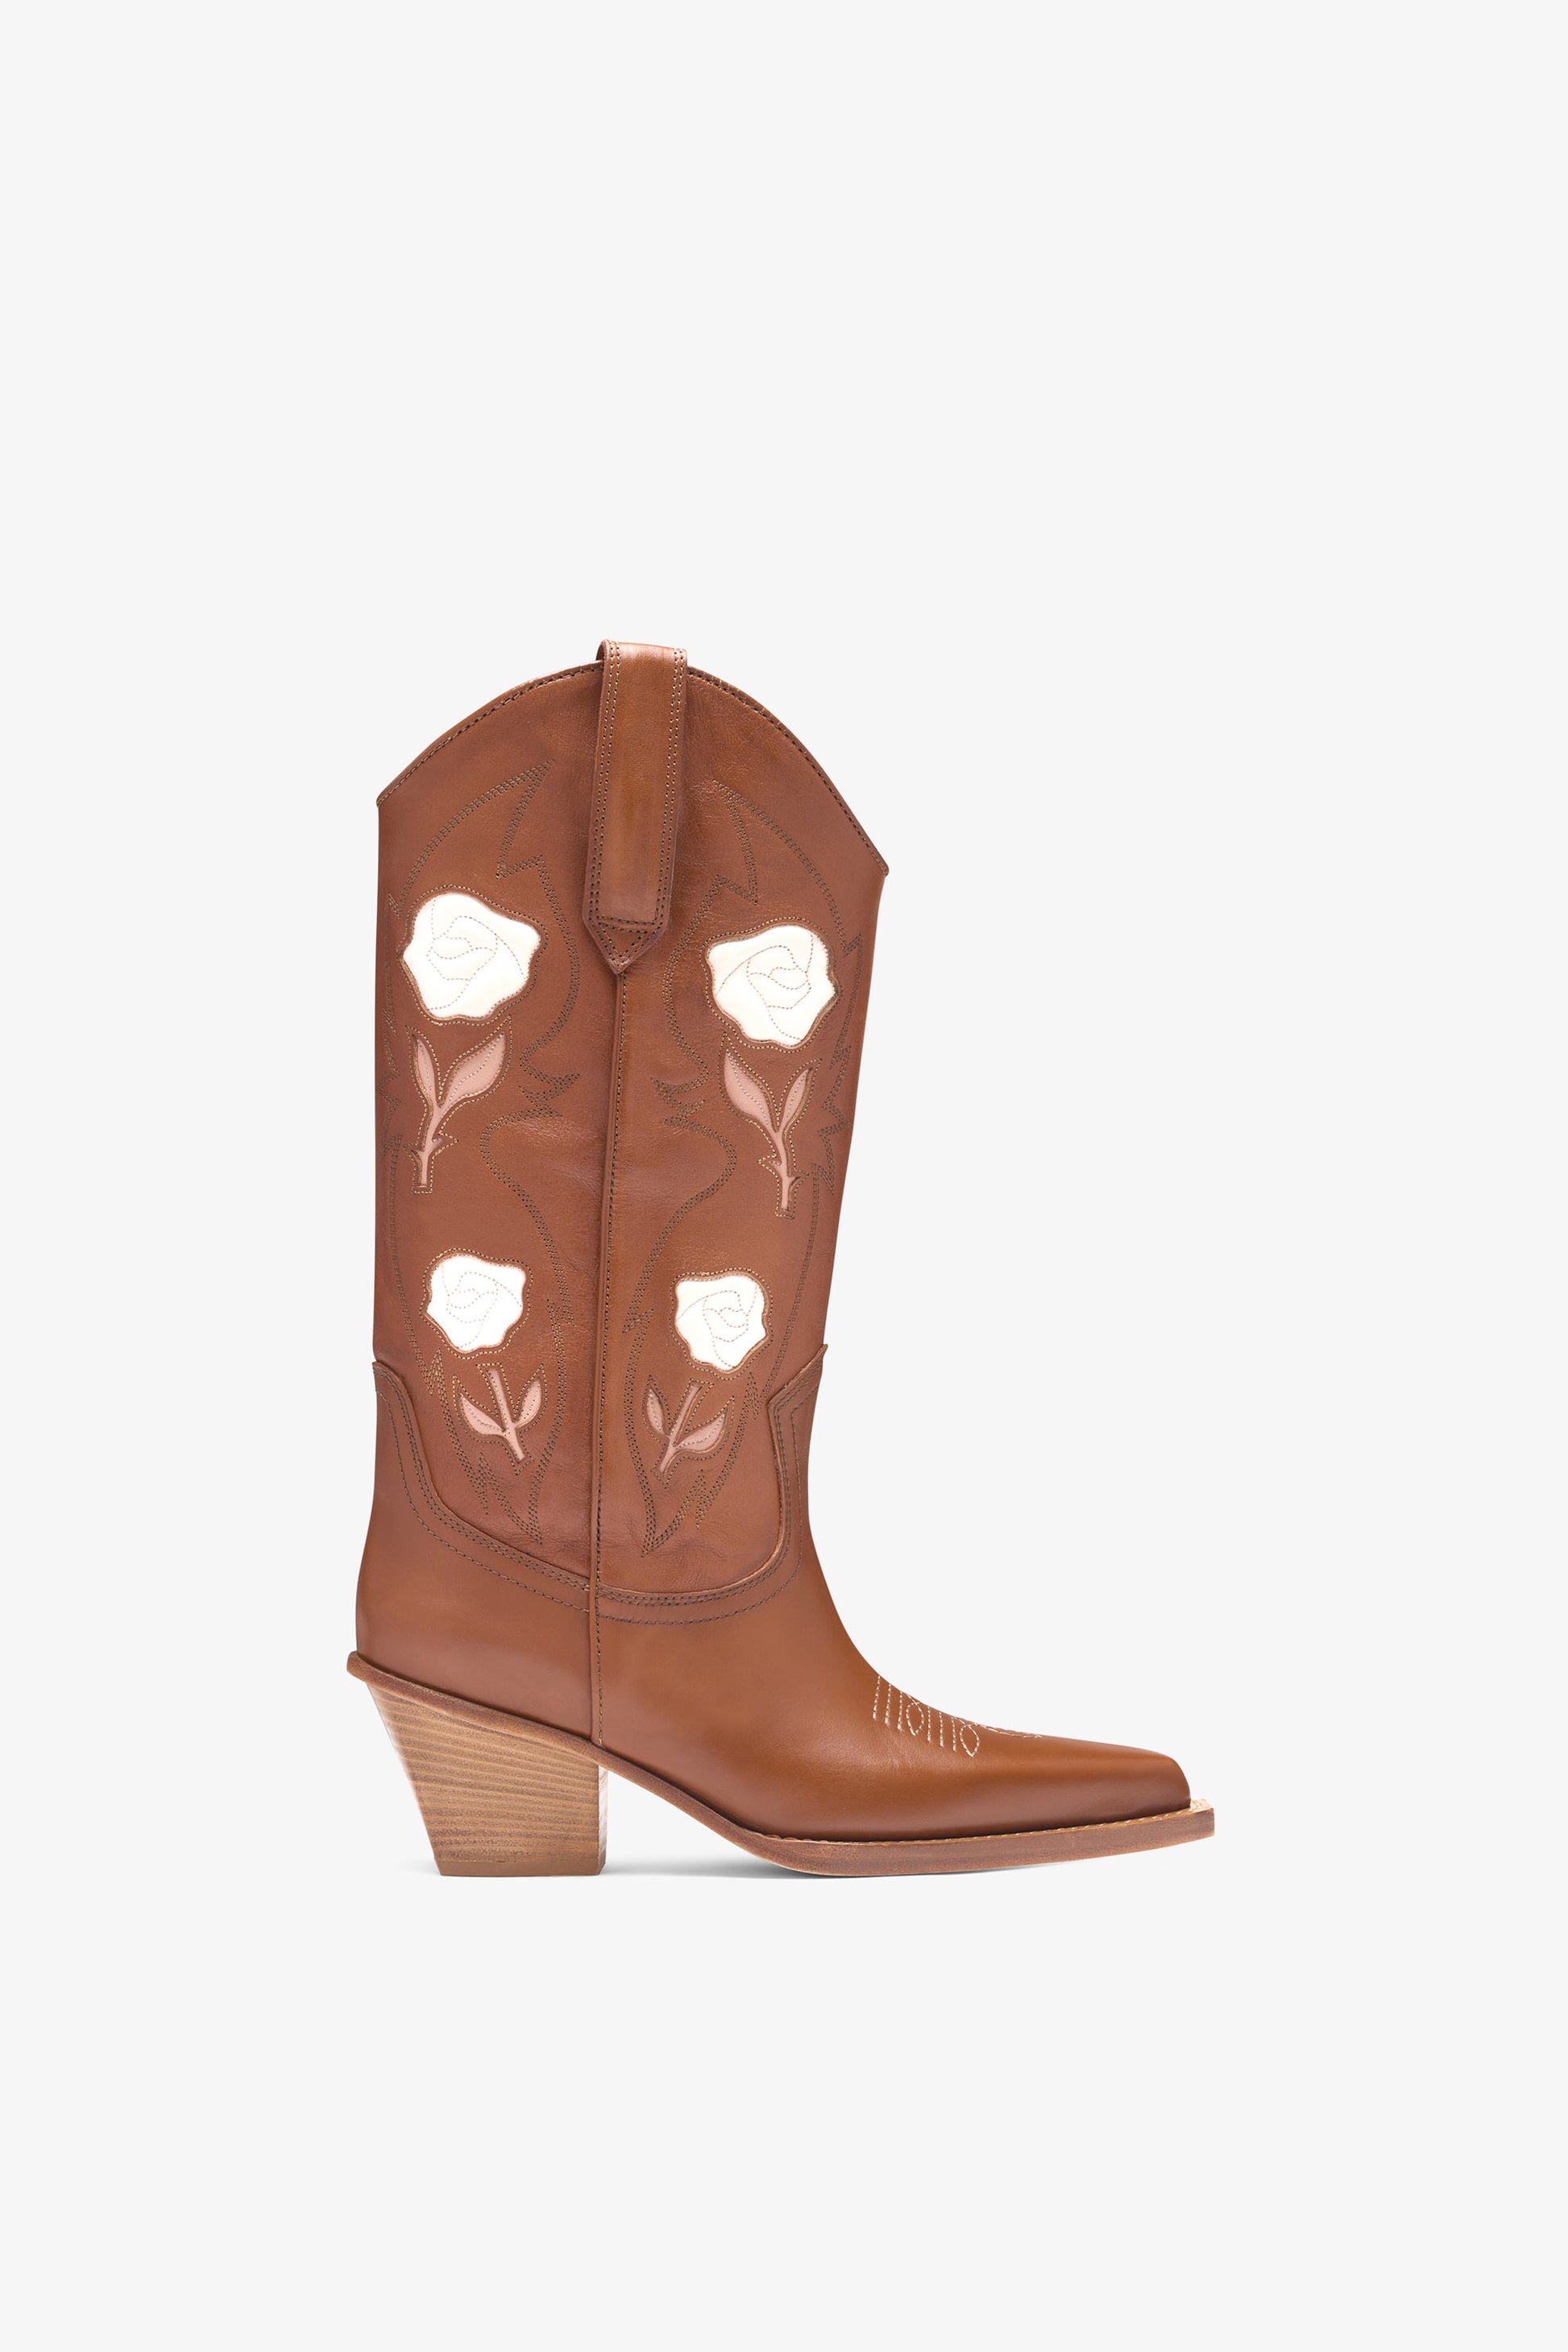 Embroidered tan suede Texan boot